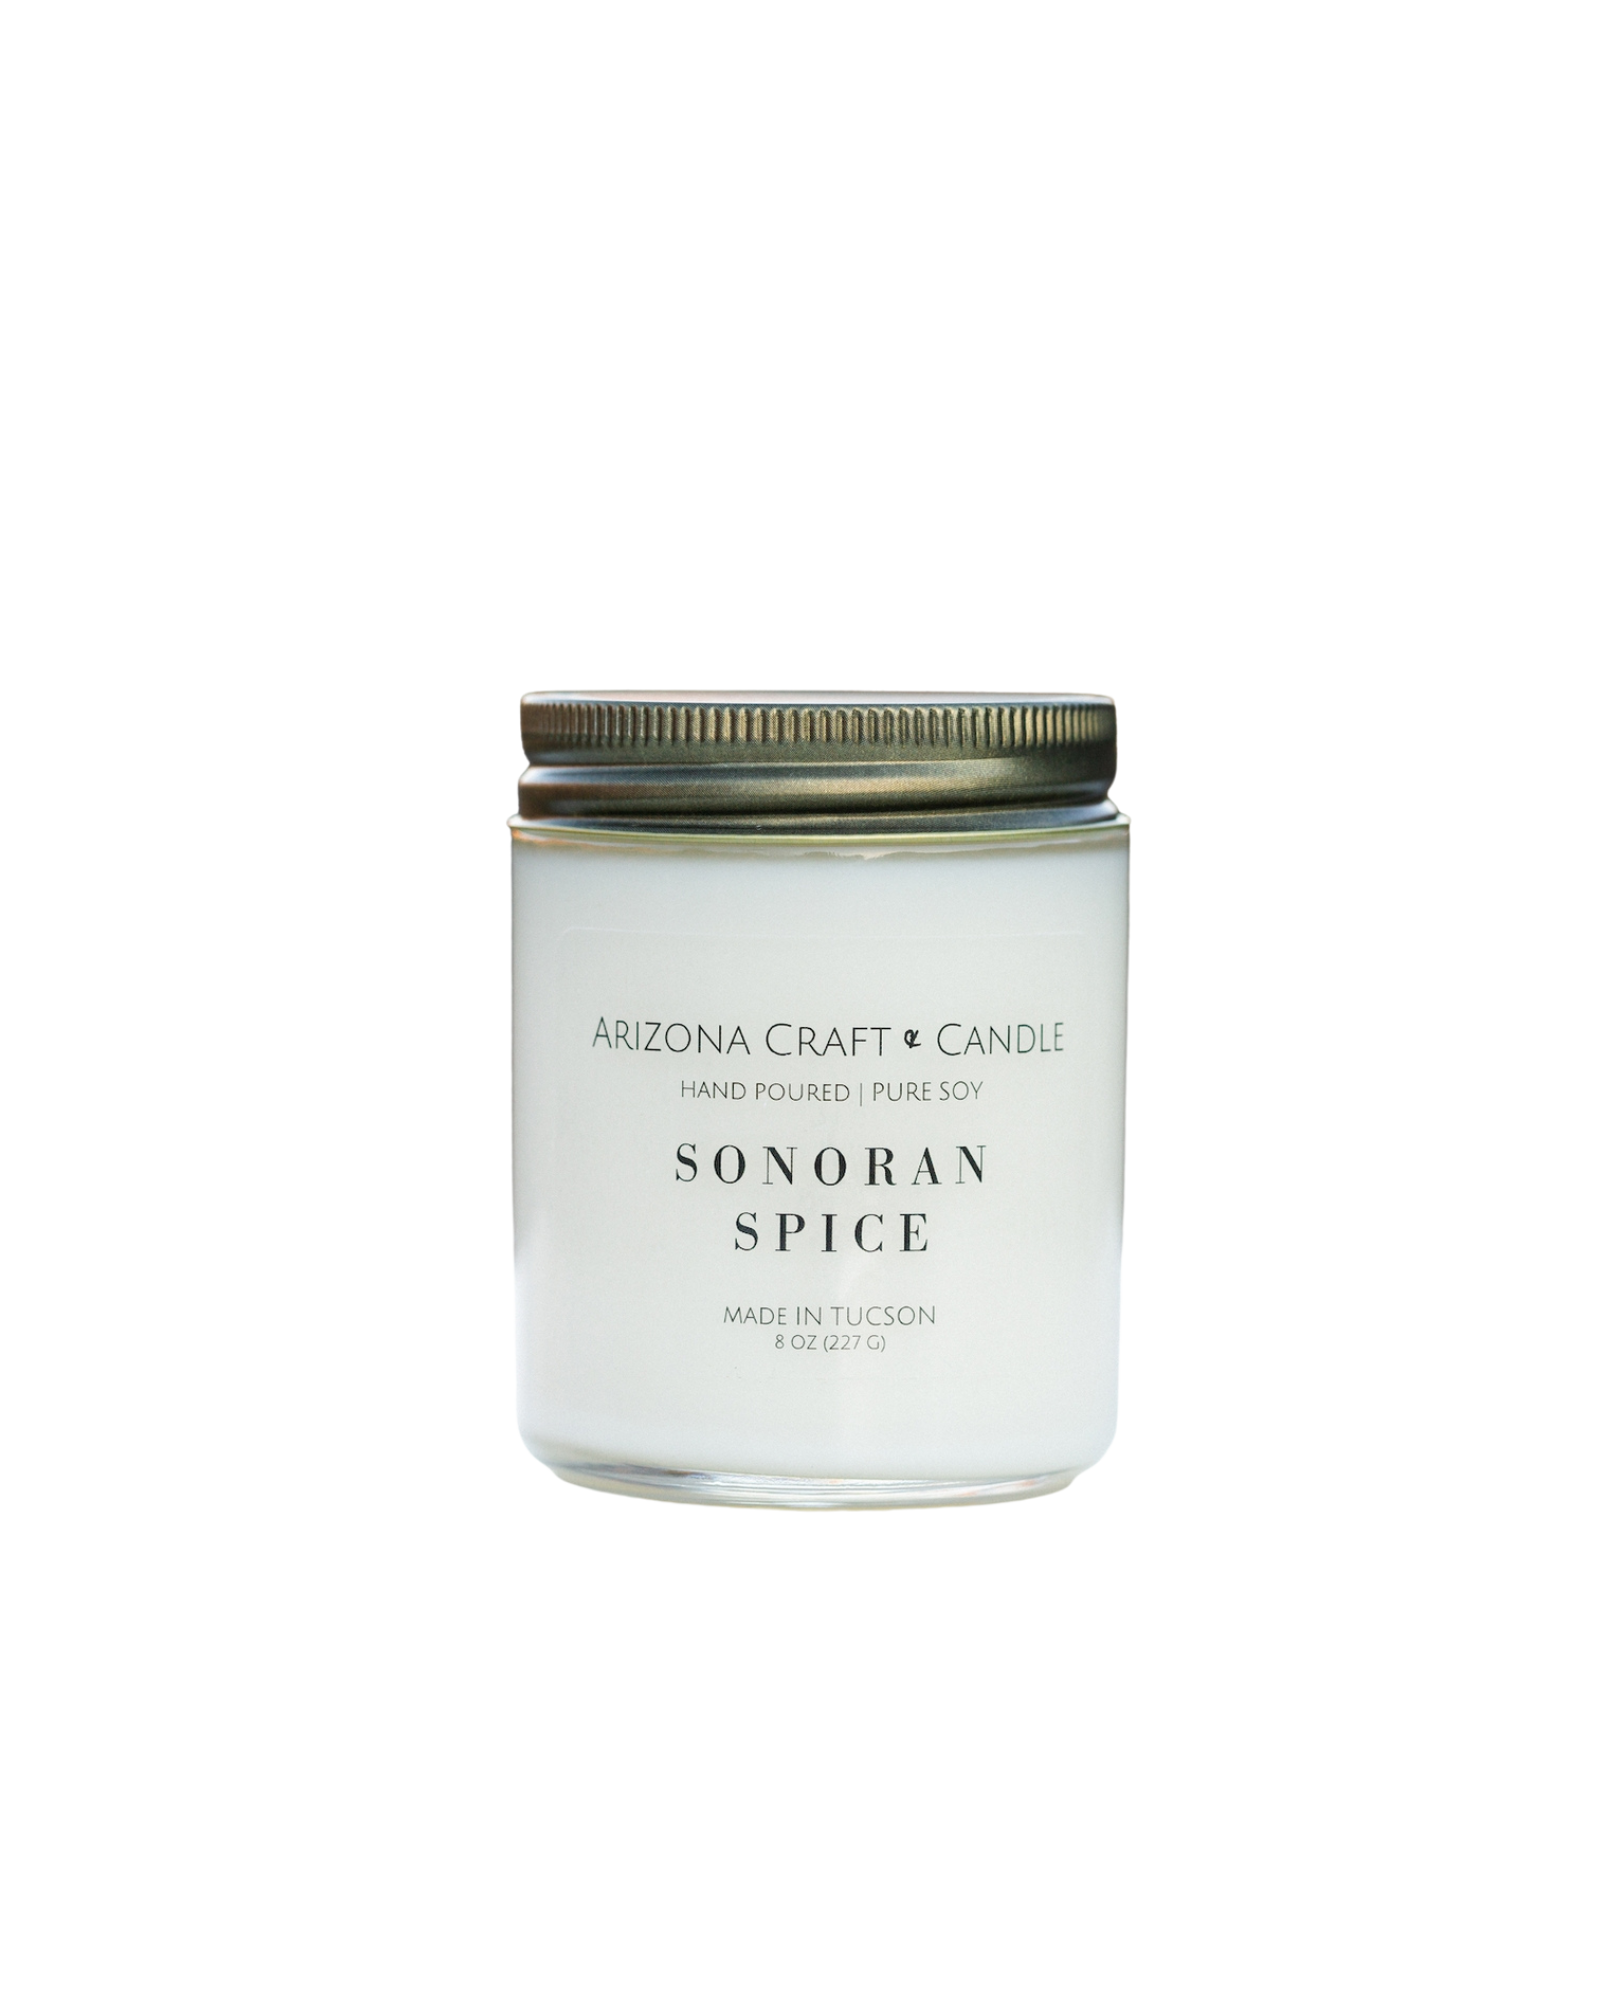 Sonoran spice clear glass jar candle with antique gold lid